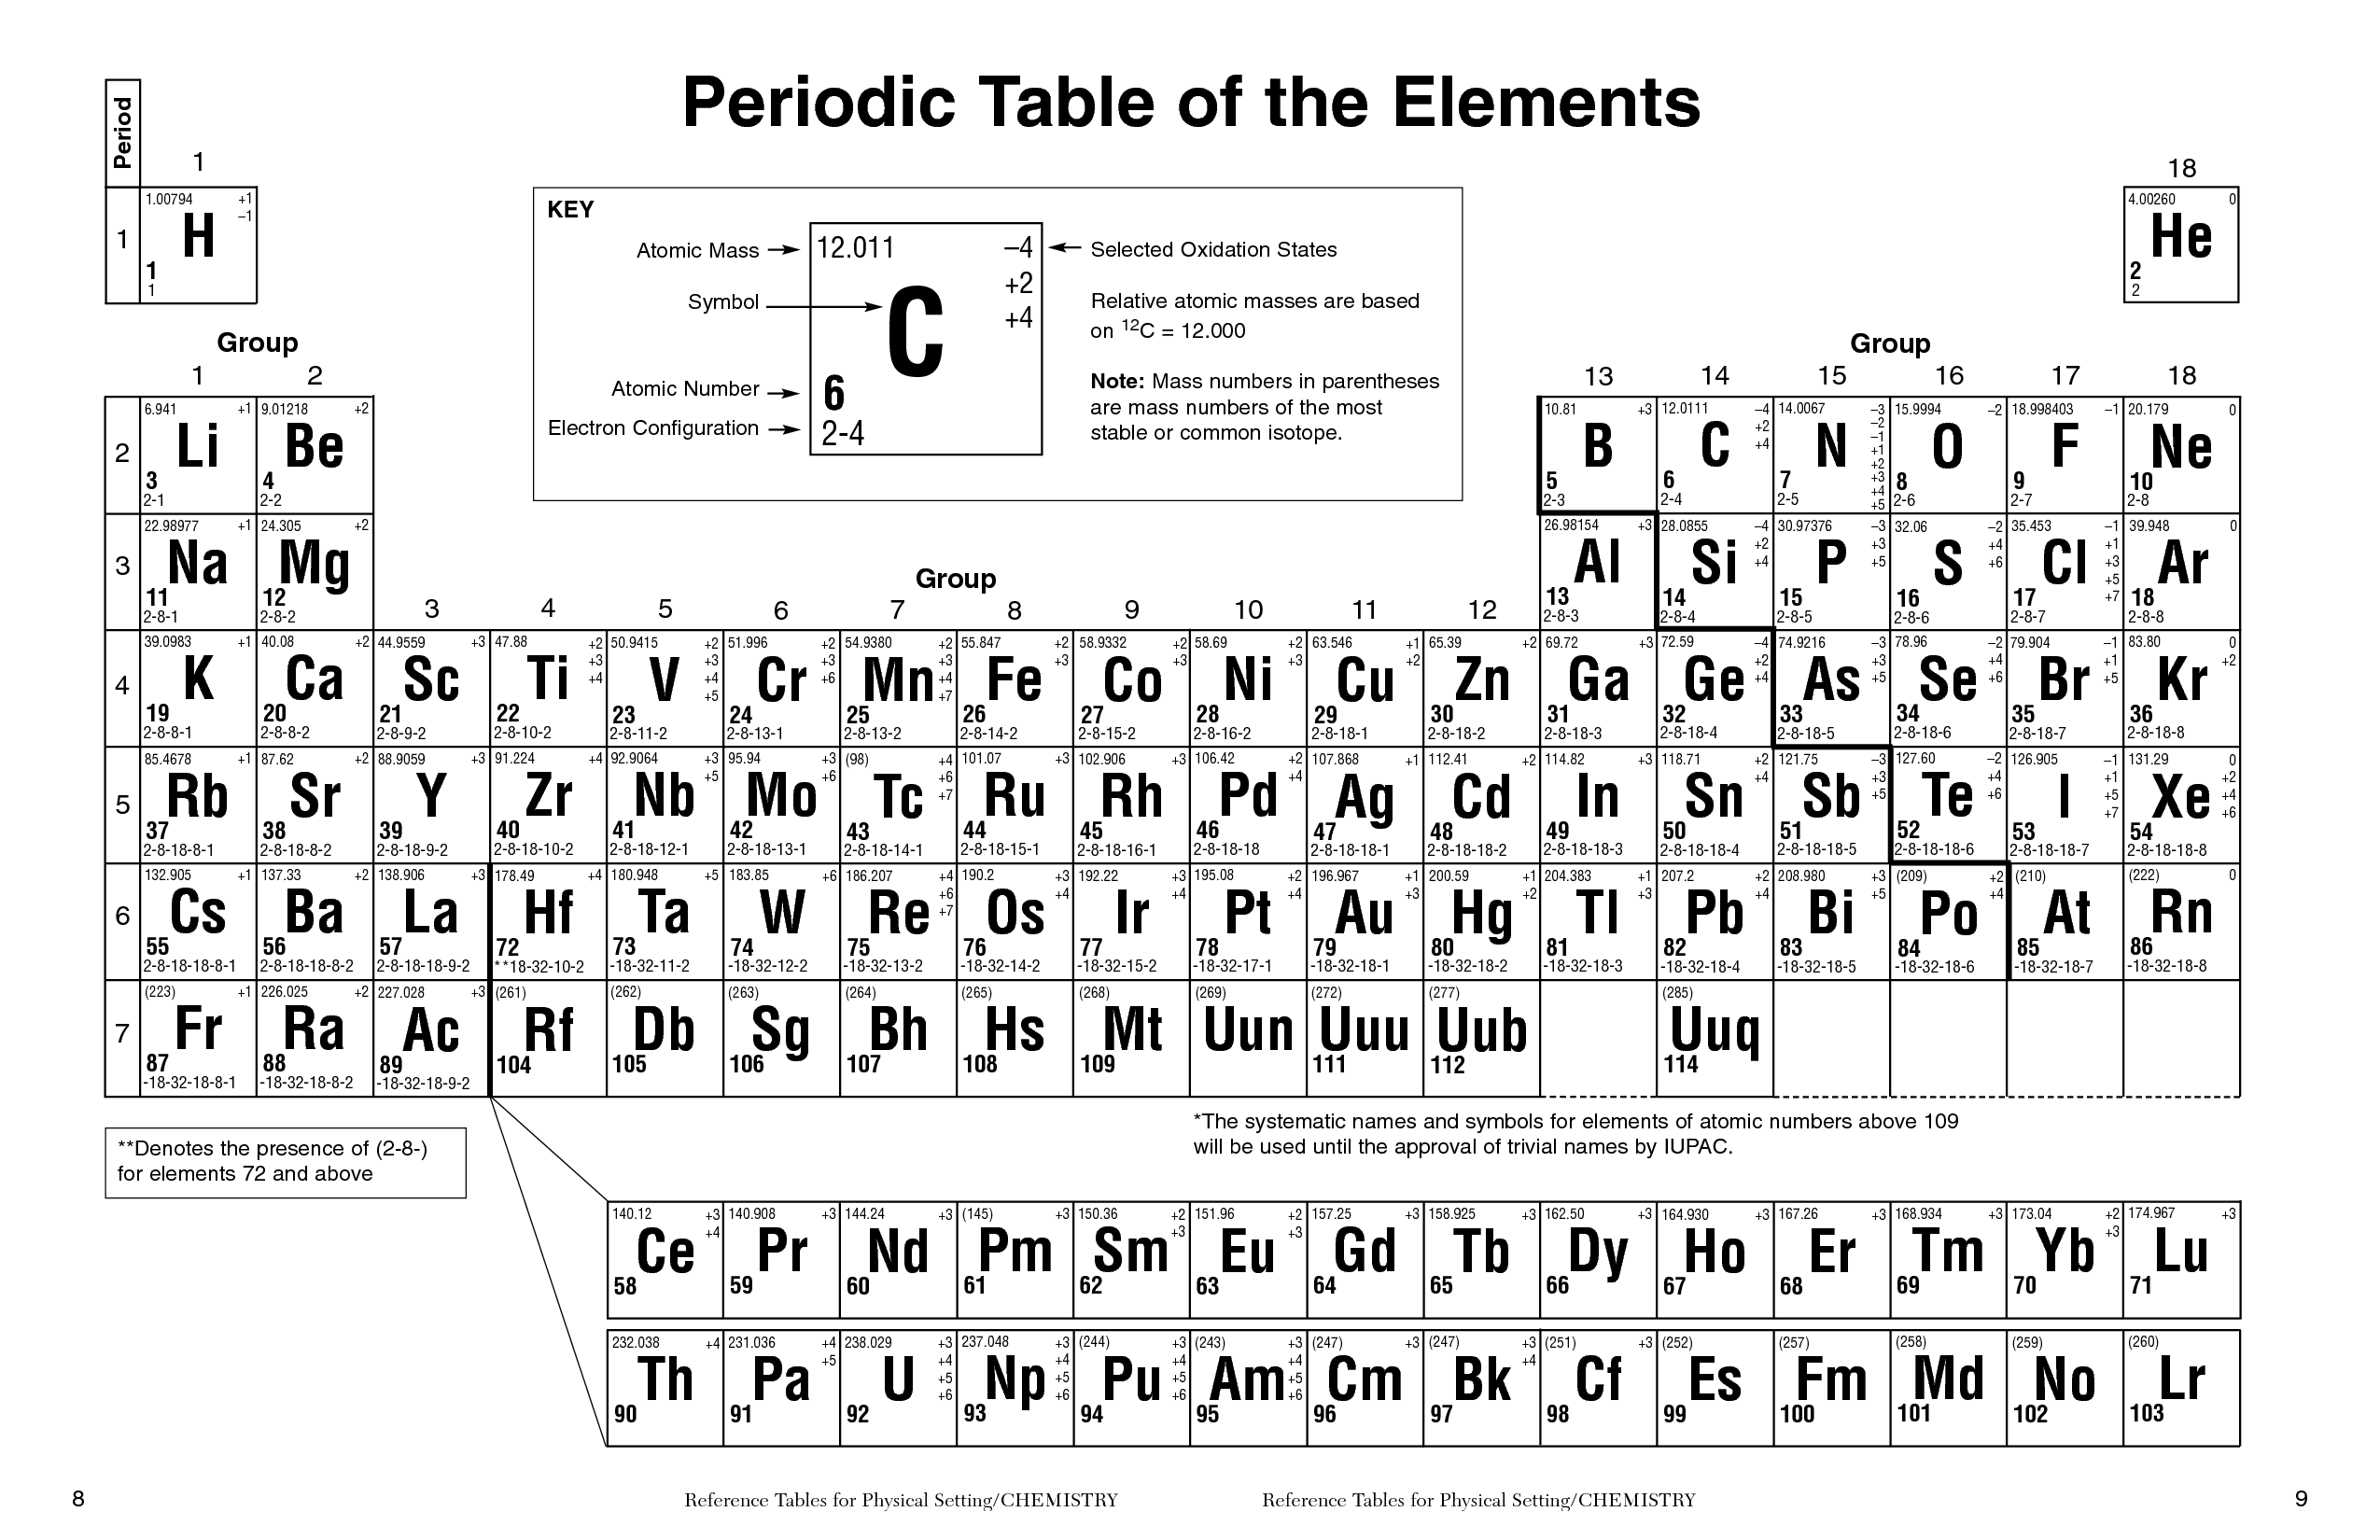 Oxidation Number Of Elements Chart